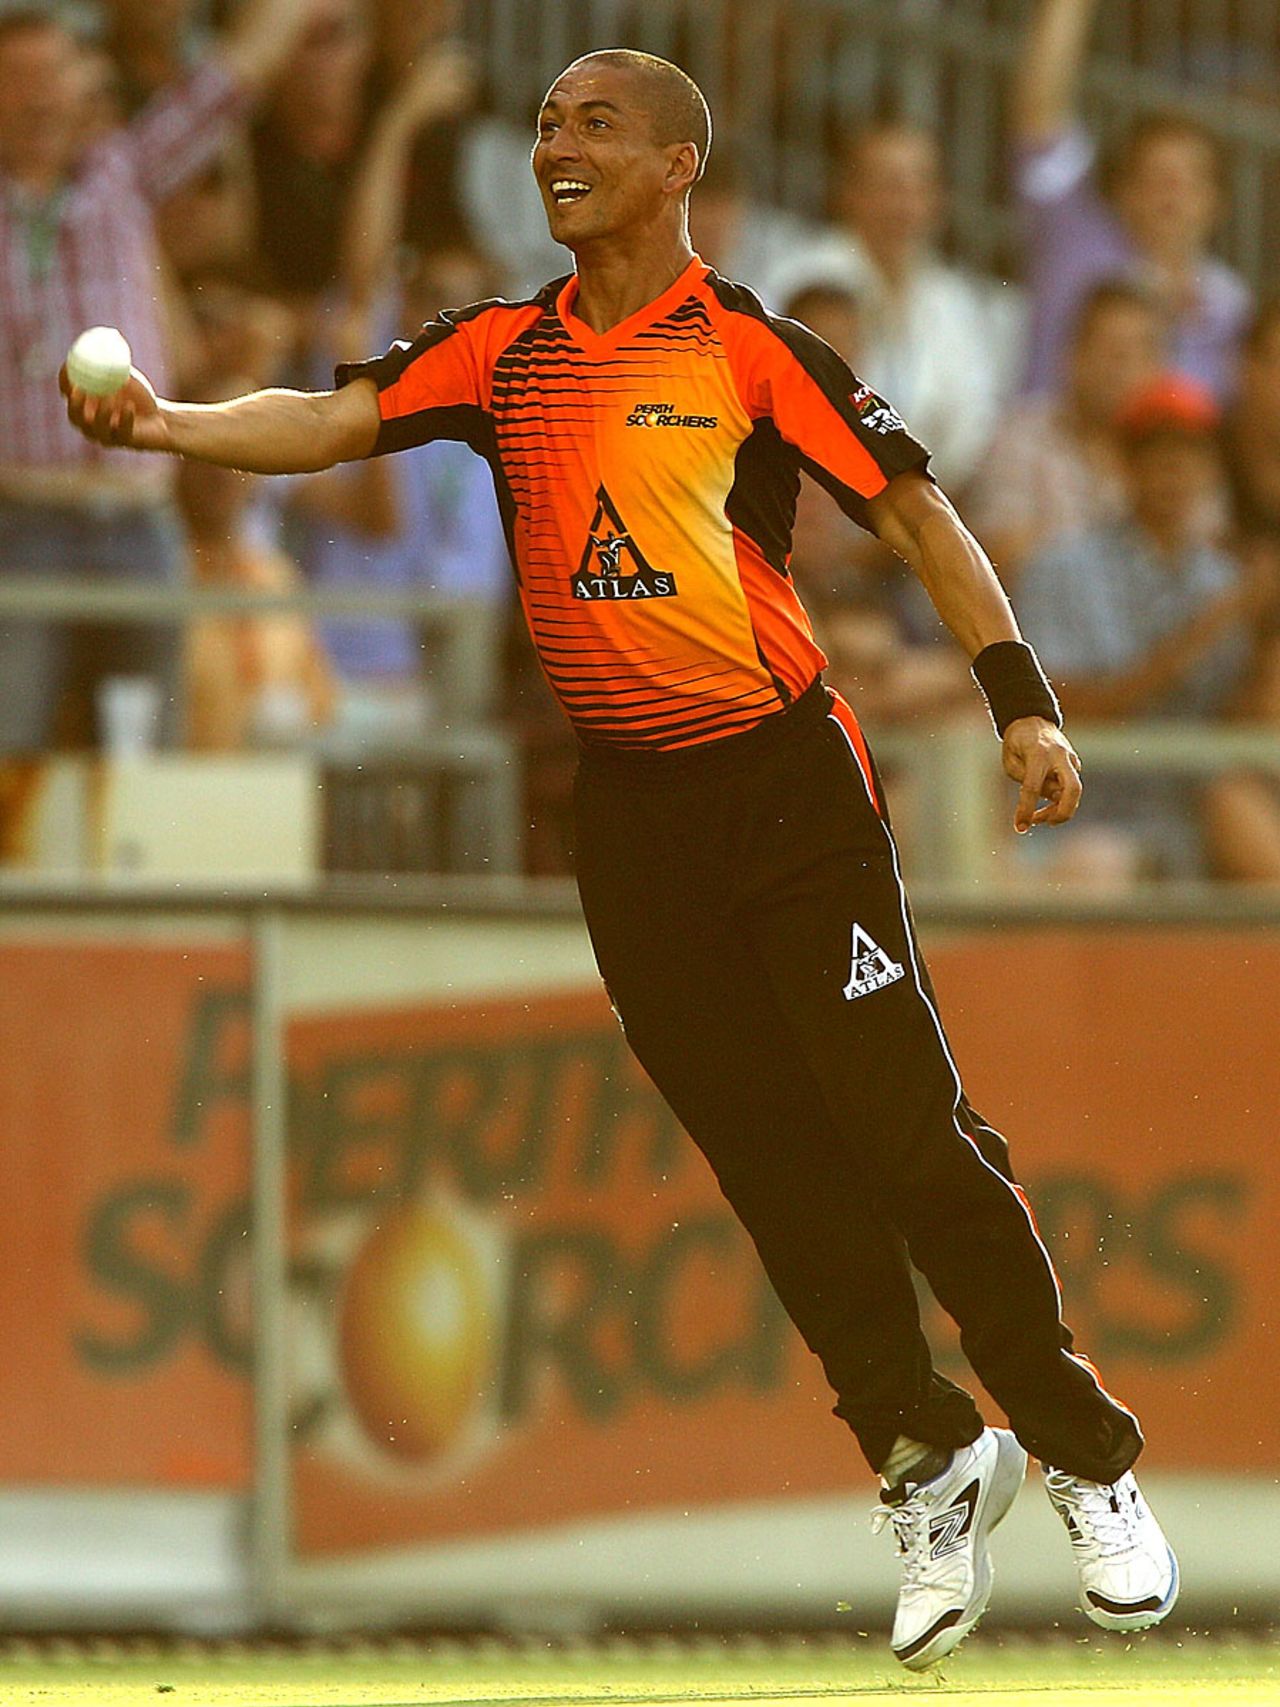 Alfonso Thomas is thrilled after taking a catch, Perth Scorchers v Sydney Thunder, Big Bash League, Perth, January 4, 2013